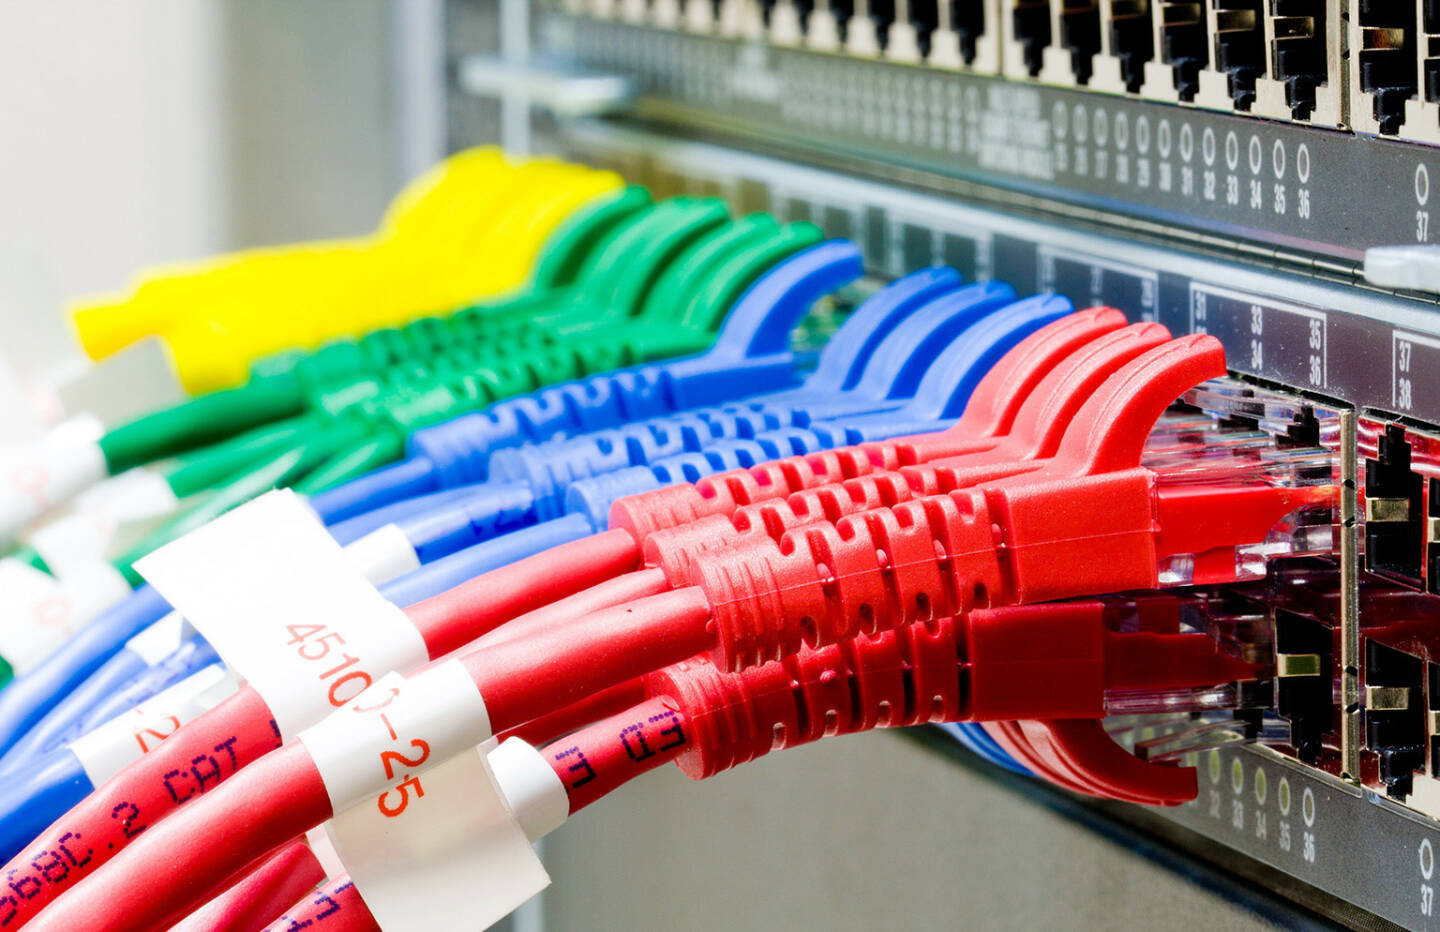 Netzwerk, Kabel, Switch, Internet http://www.shutterstock.com/de/pic-109305173/stock-photo-network-switch-and-utp-ethernet-cables.html